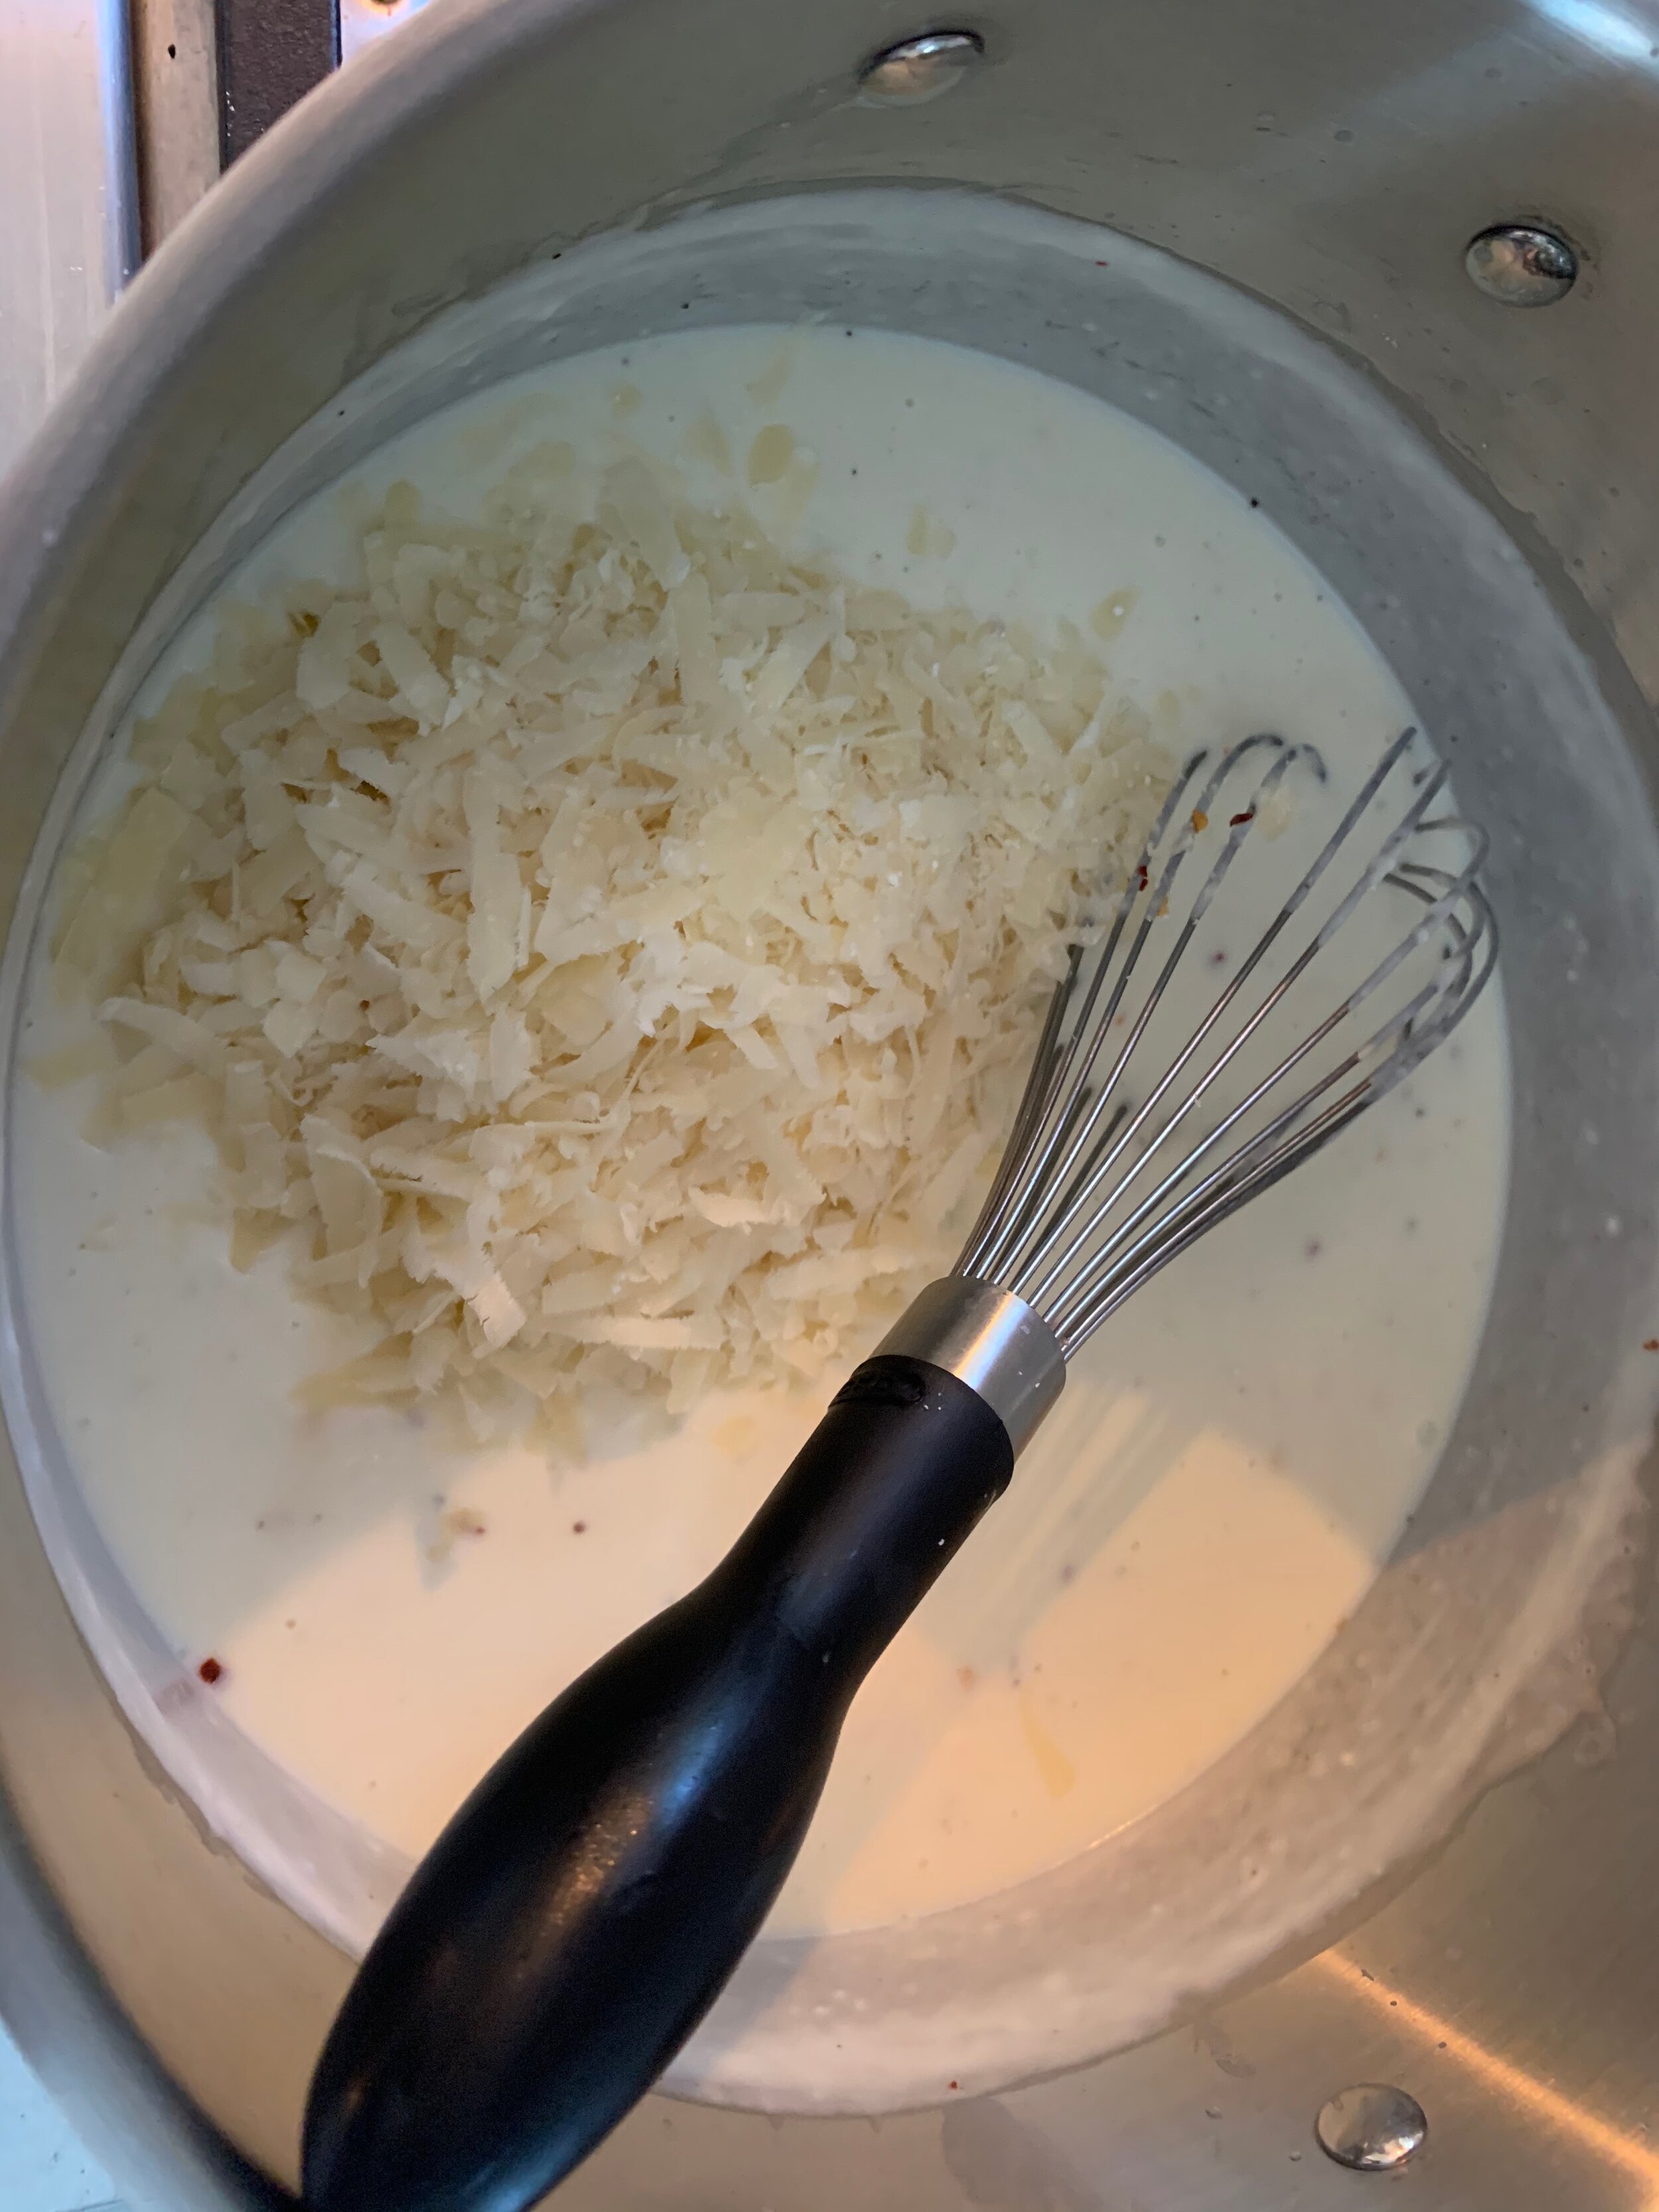 Cheese being added after the sauce has been removed from the heat